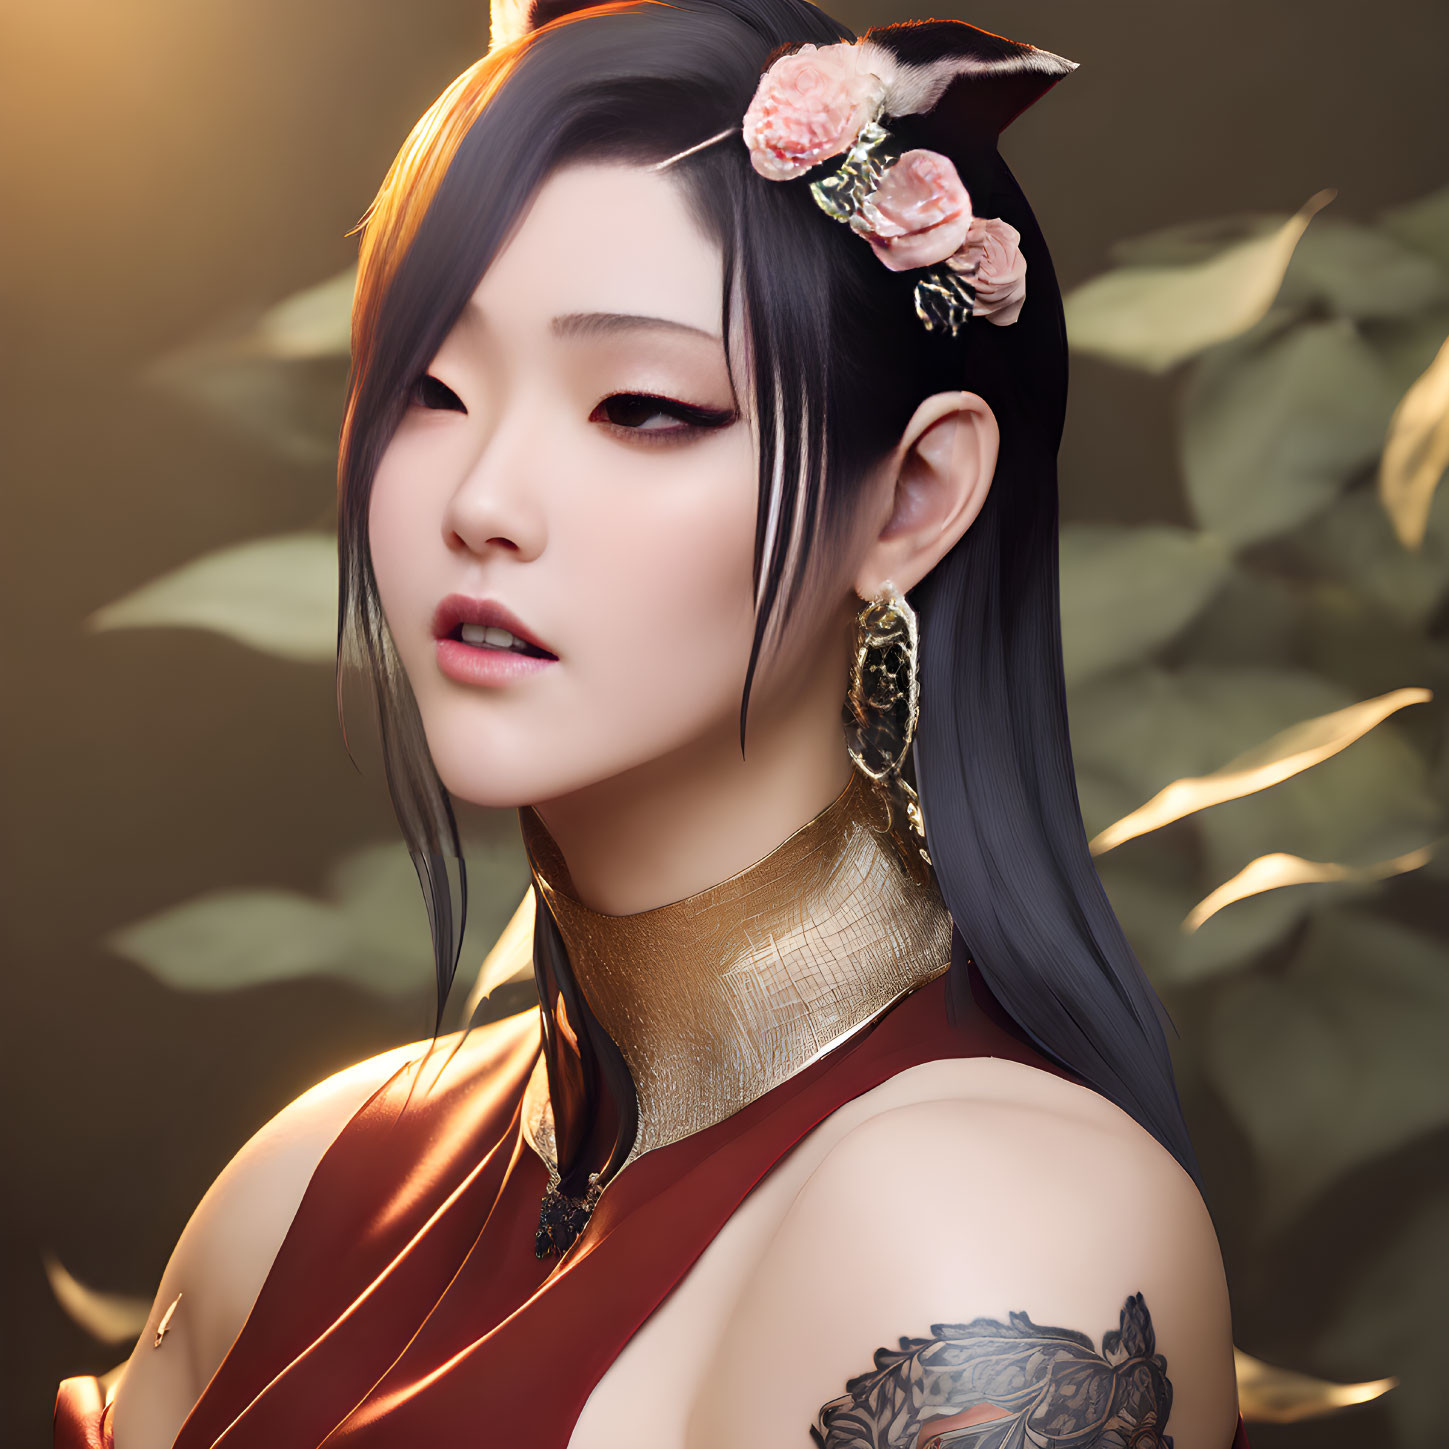 Digital portrait of woman with floral hair accessories, striking makeup, golden choker, and shoulder tattoo